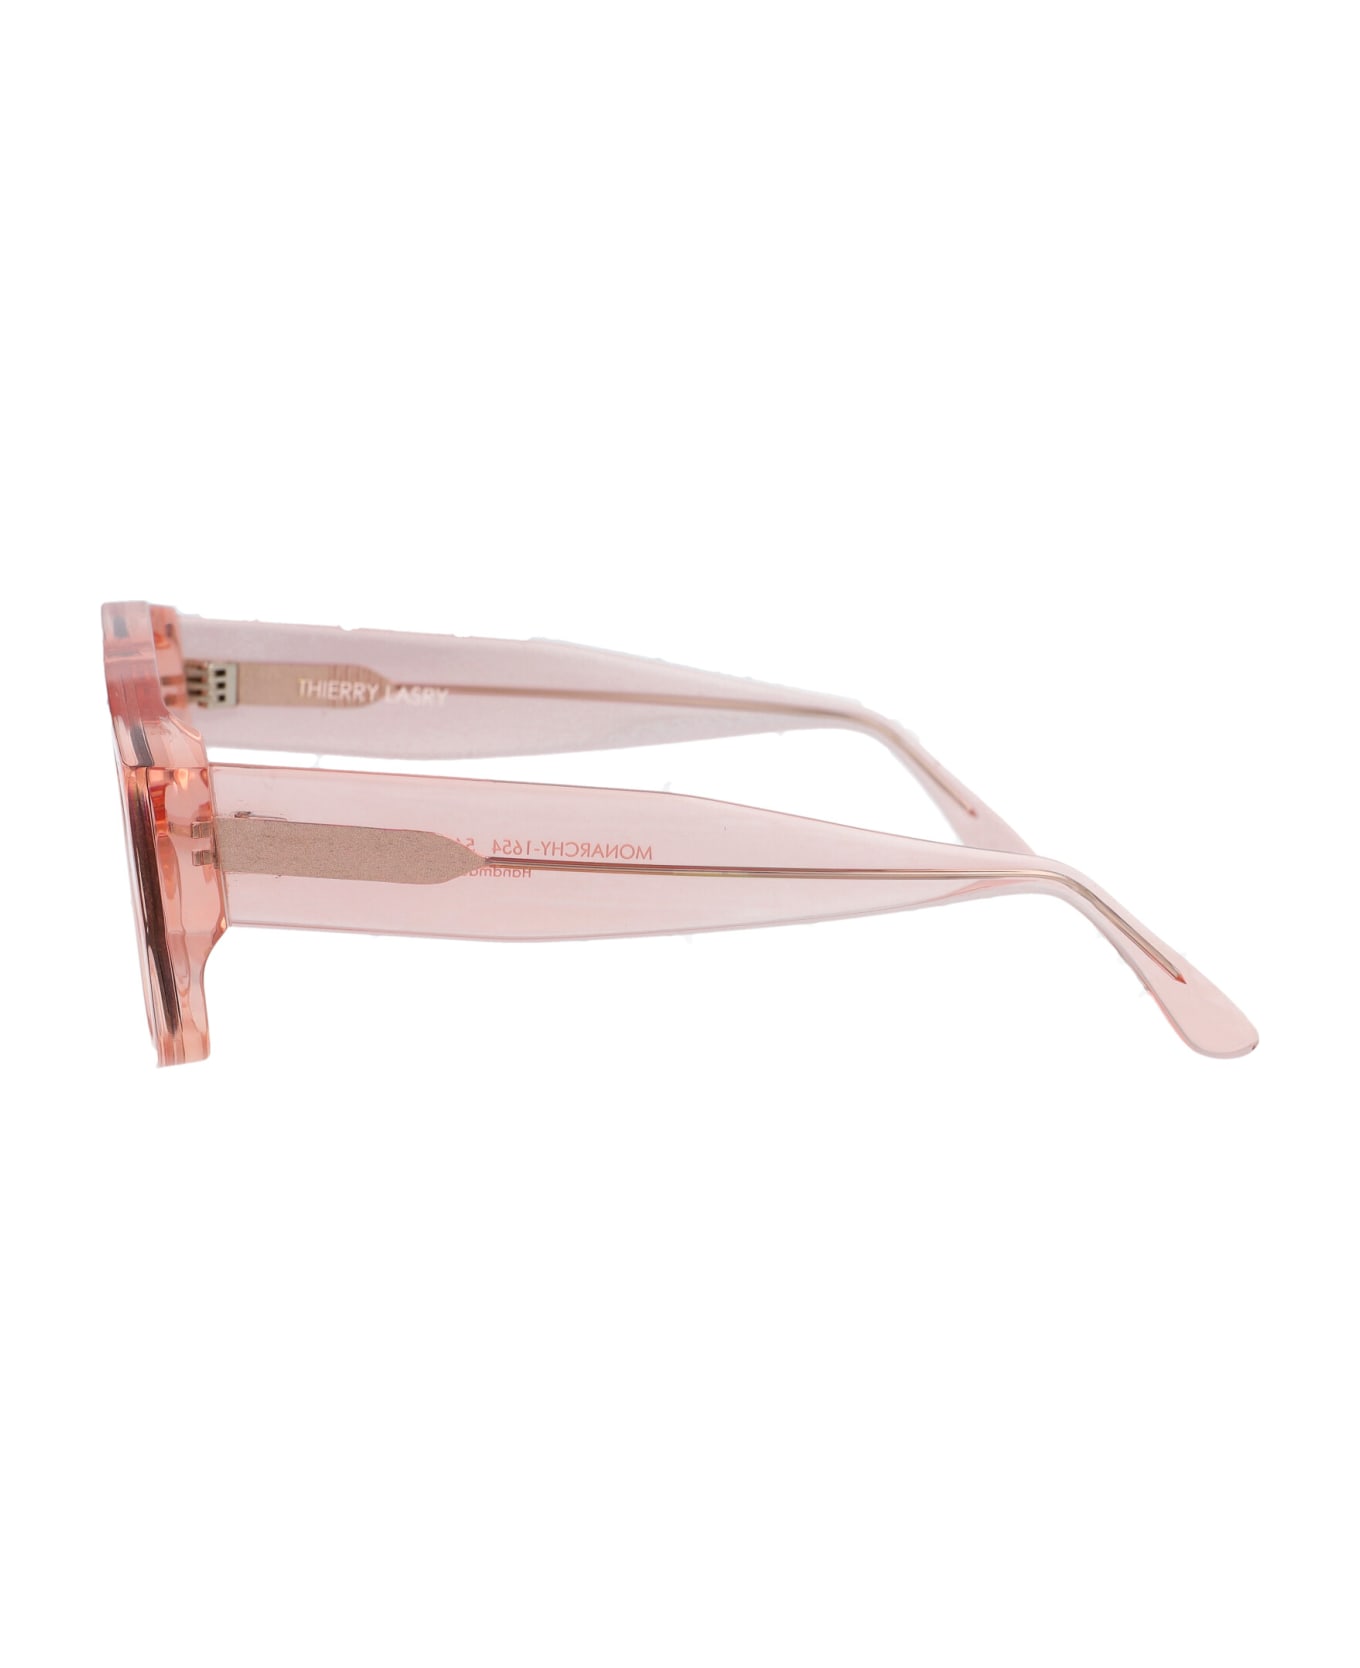 Thierry Lasry Monarchy Sunglasses - 1654 PINK